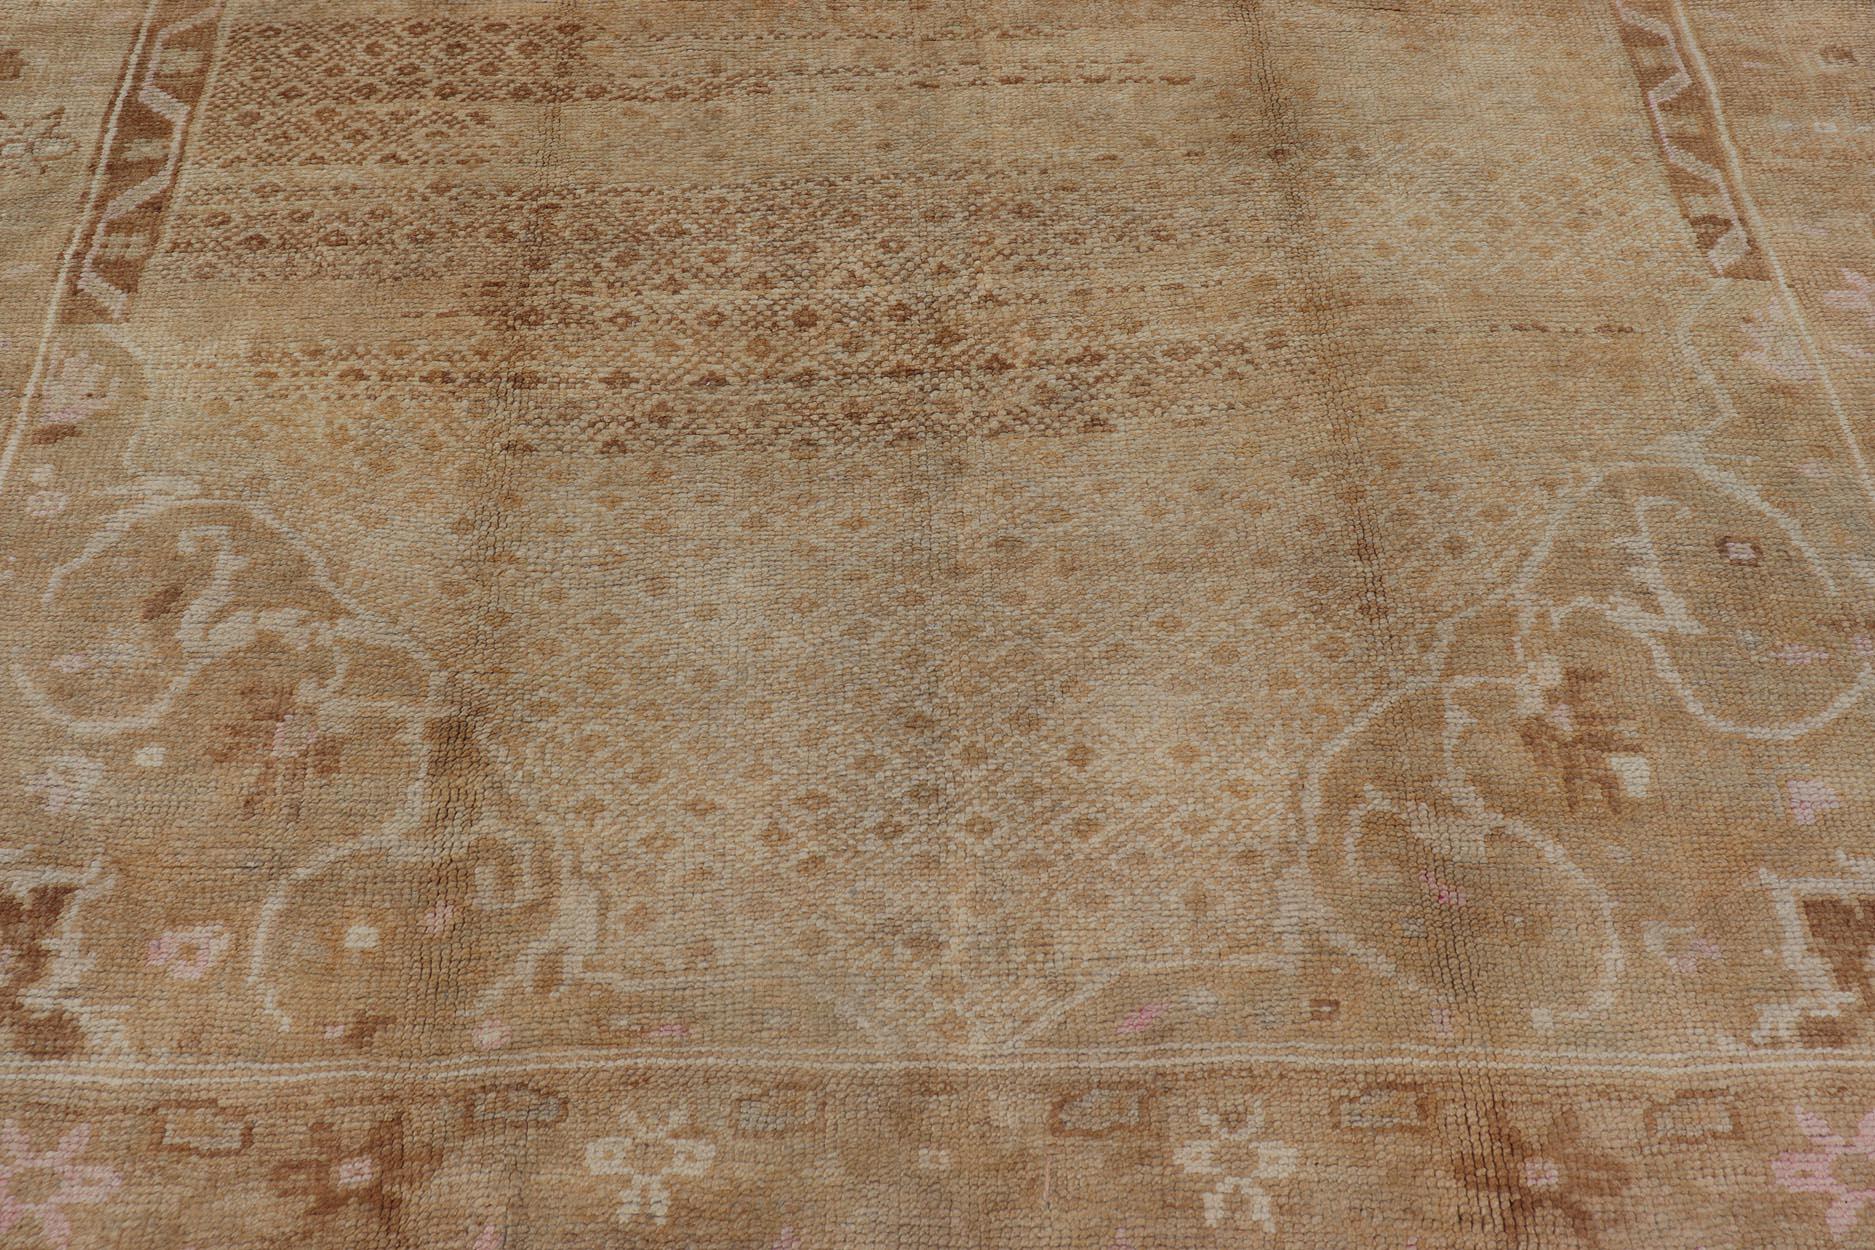 Vintage Turkish Rug with All-Over Diamond Design and Floral Border in Neutrals For Sale 4